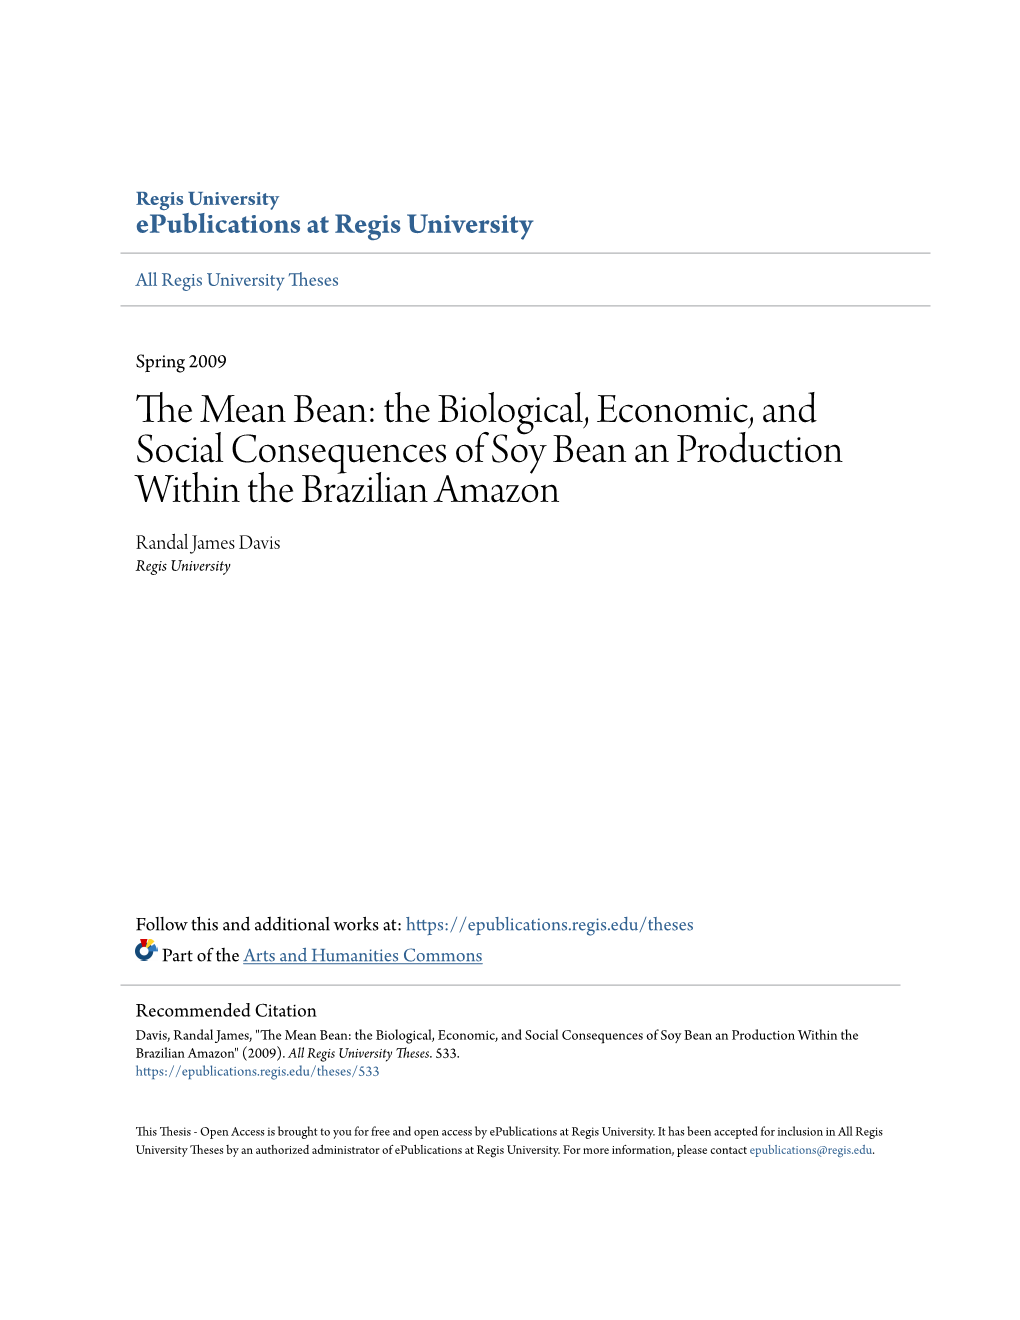 The Mean Bean: the Biological, Economic, and Social Consequences of Soybean Production Within the Brazilian Amazon